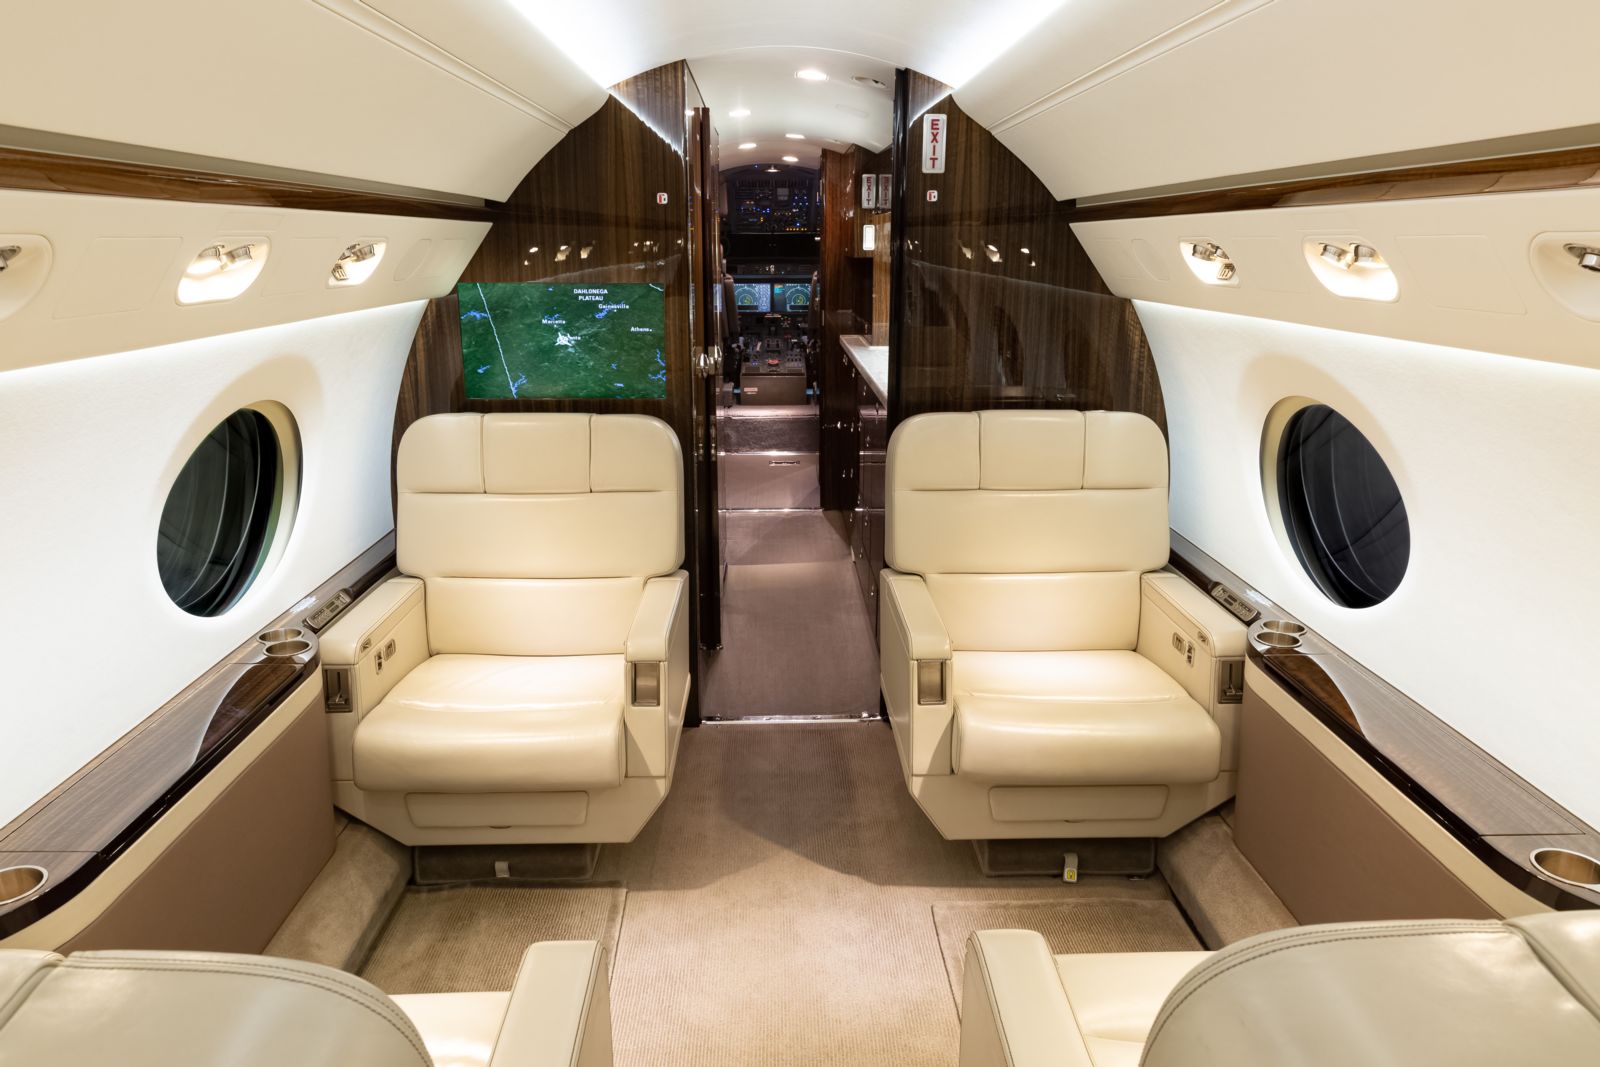 Gulfstream G550  S/N 5484 for sale | gallery image: /userfiles/images/G550_sn5484/fwd%20fwd.jpg